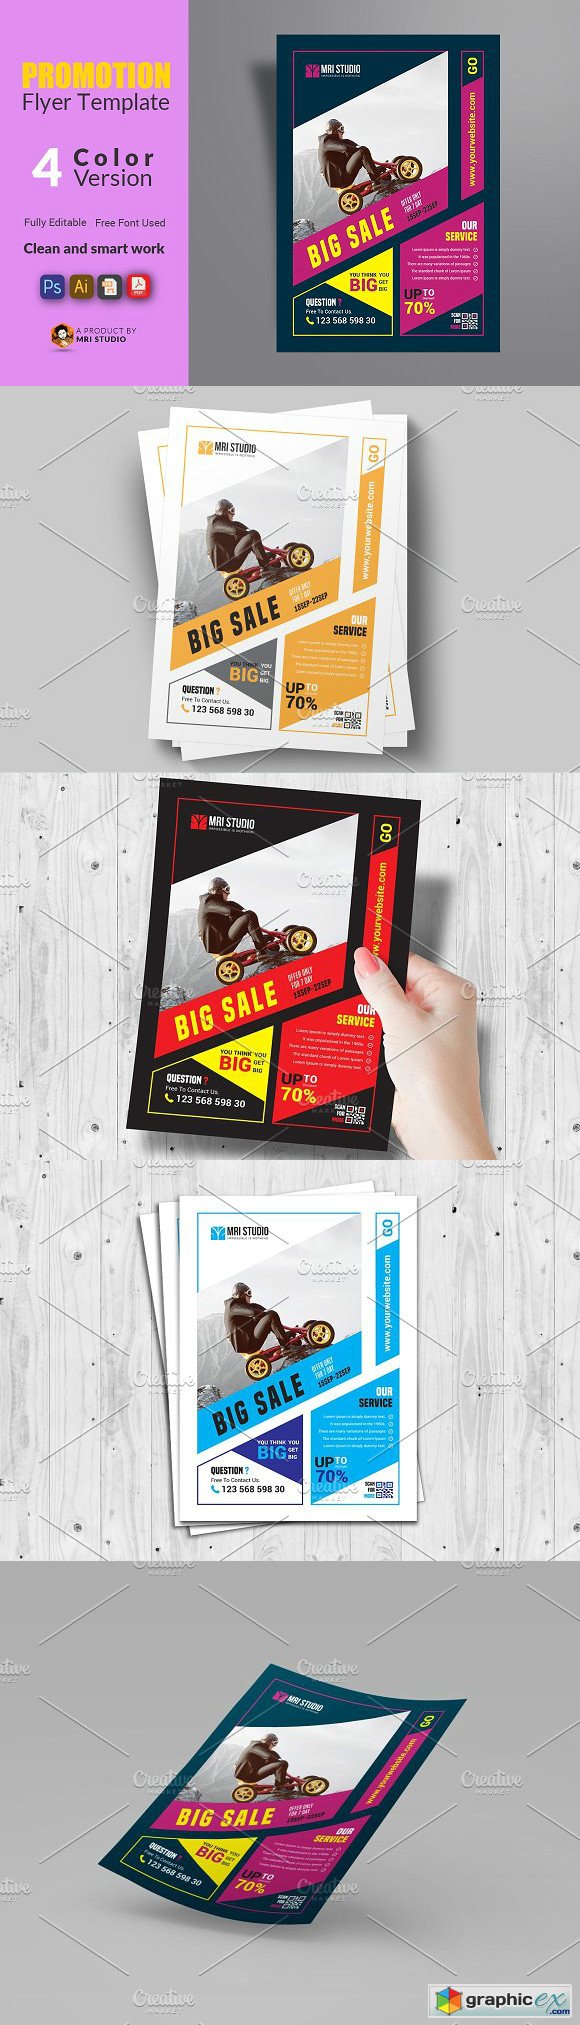 PROMOTION Flyer Template